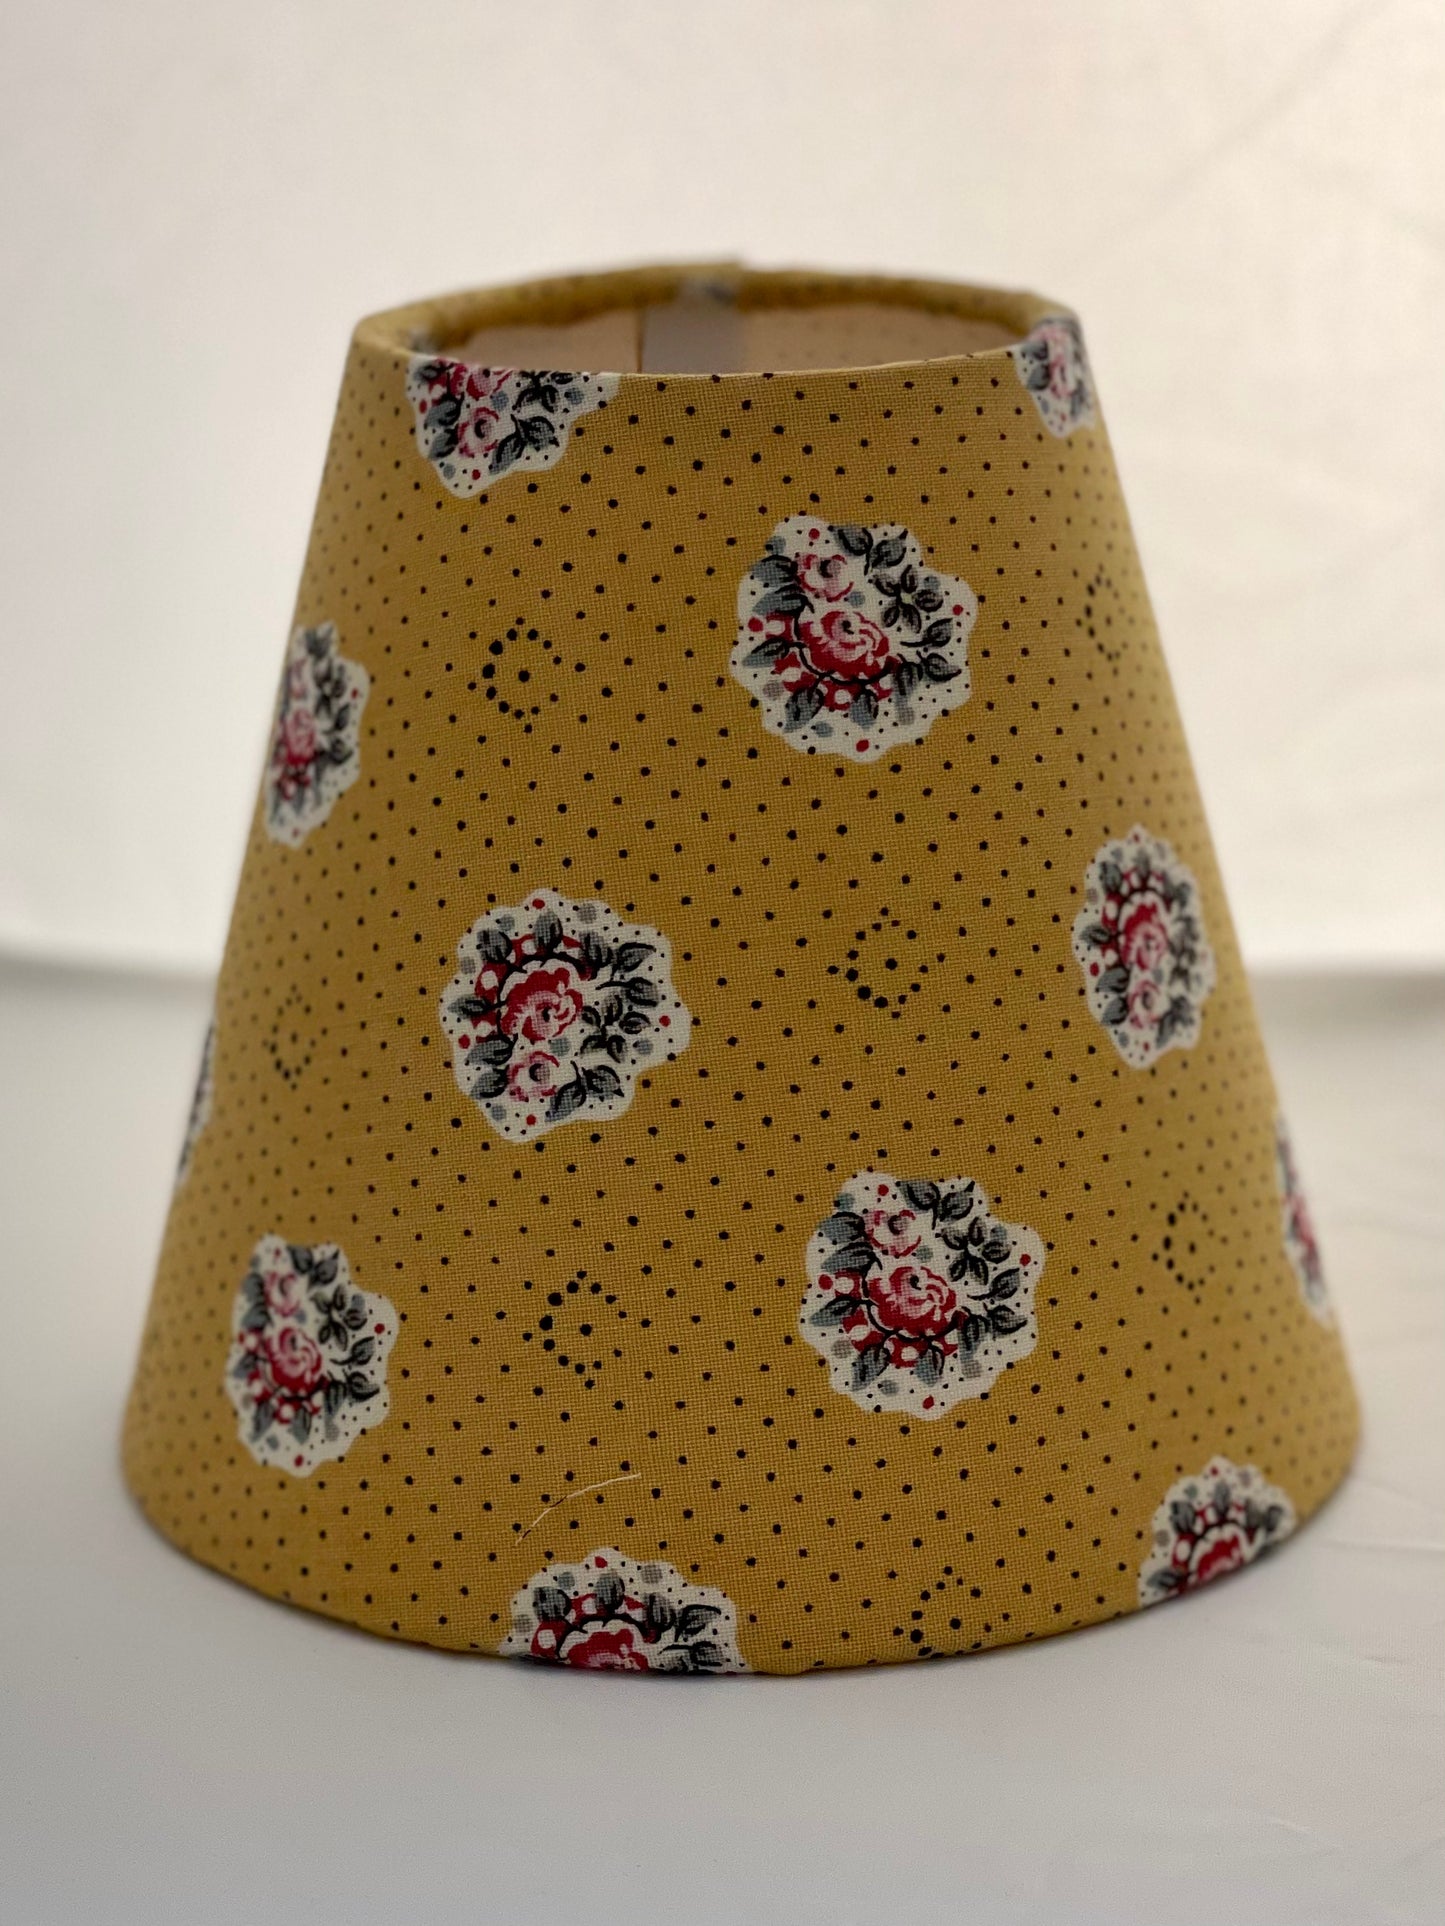 Small Clip-On Lampshade. Les Olivades "Maïanenco". Mustard Yellow with Pink Floral Bouquets.